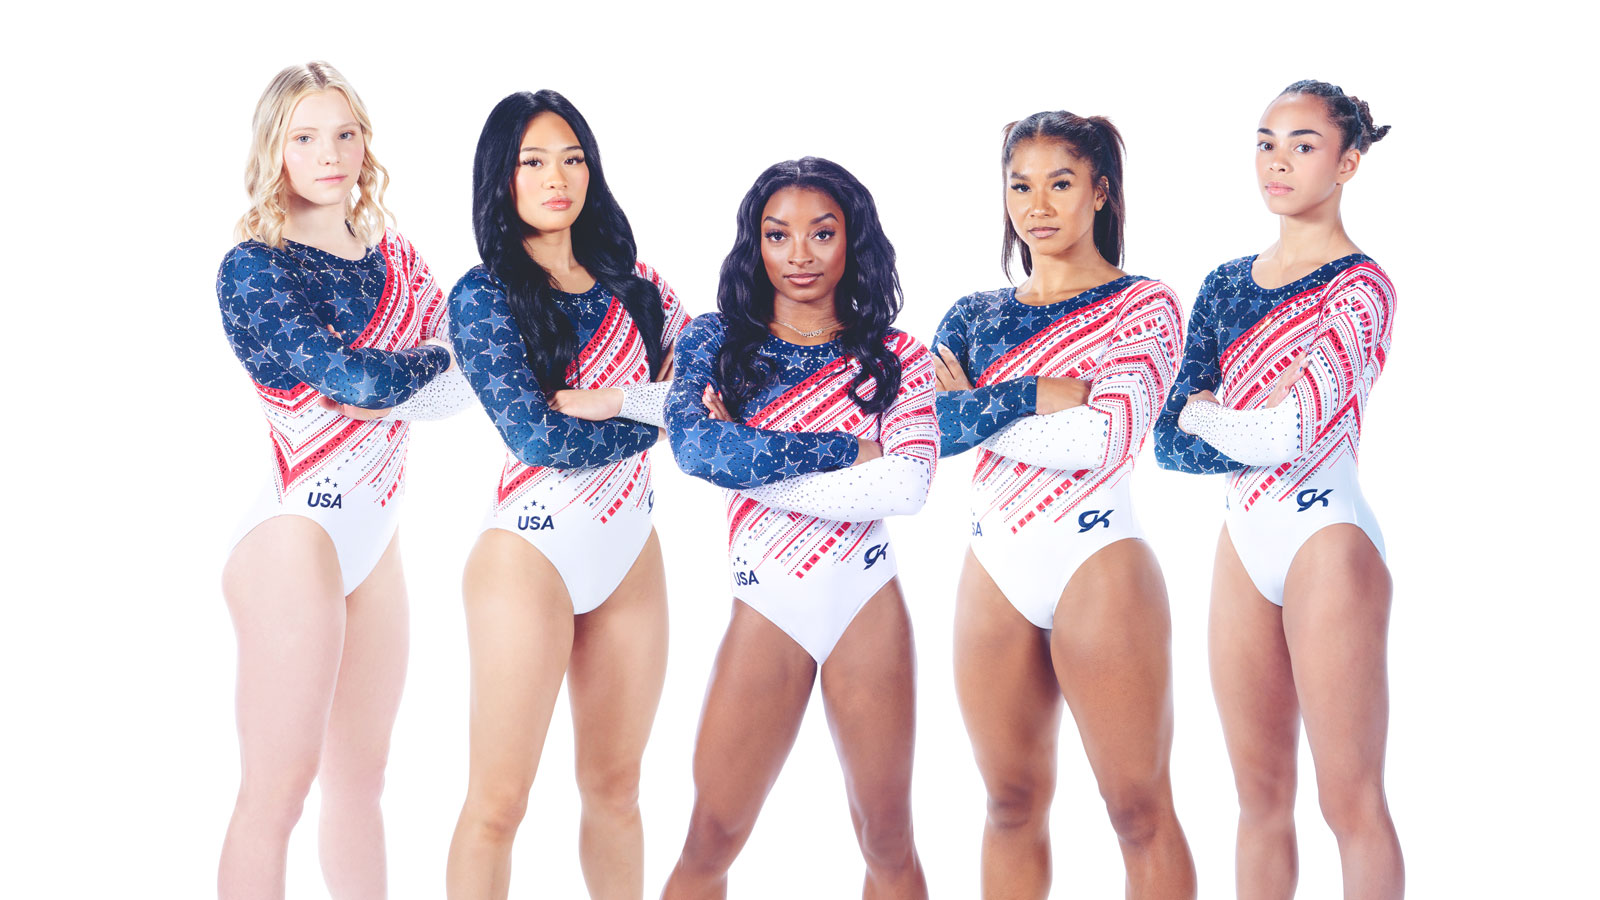 Five team USA gymnasts wearing their red, white, and blue uniforms